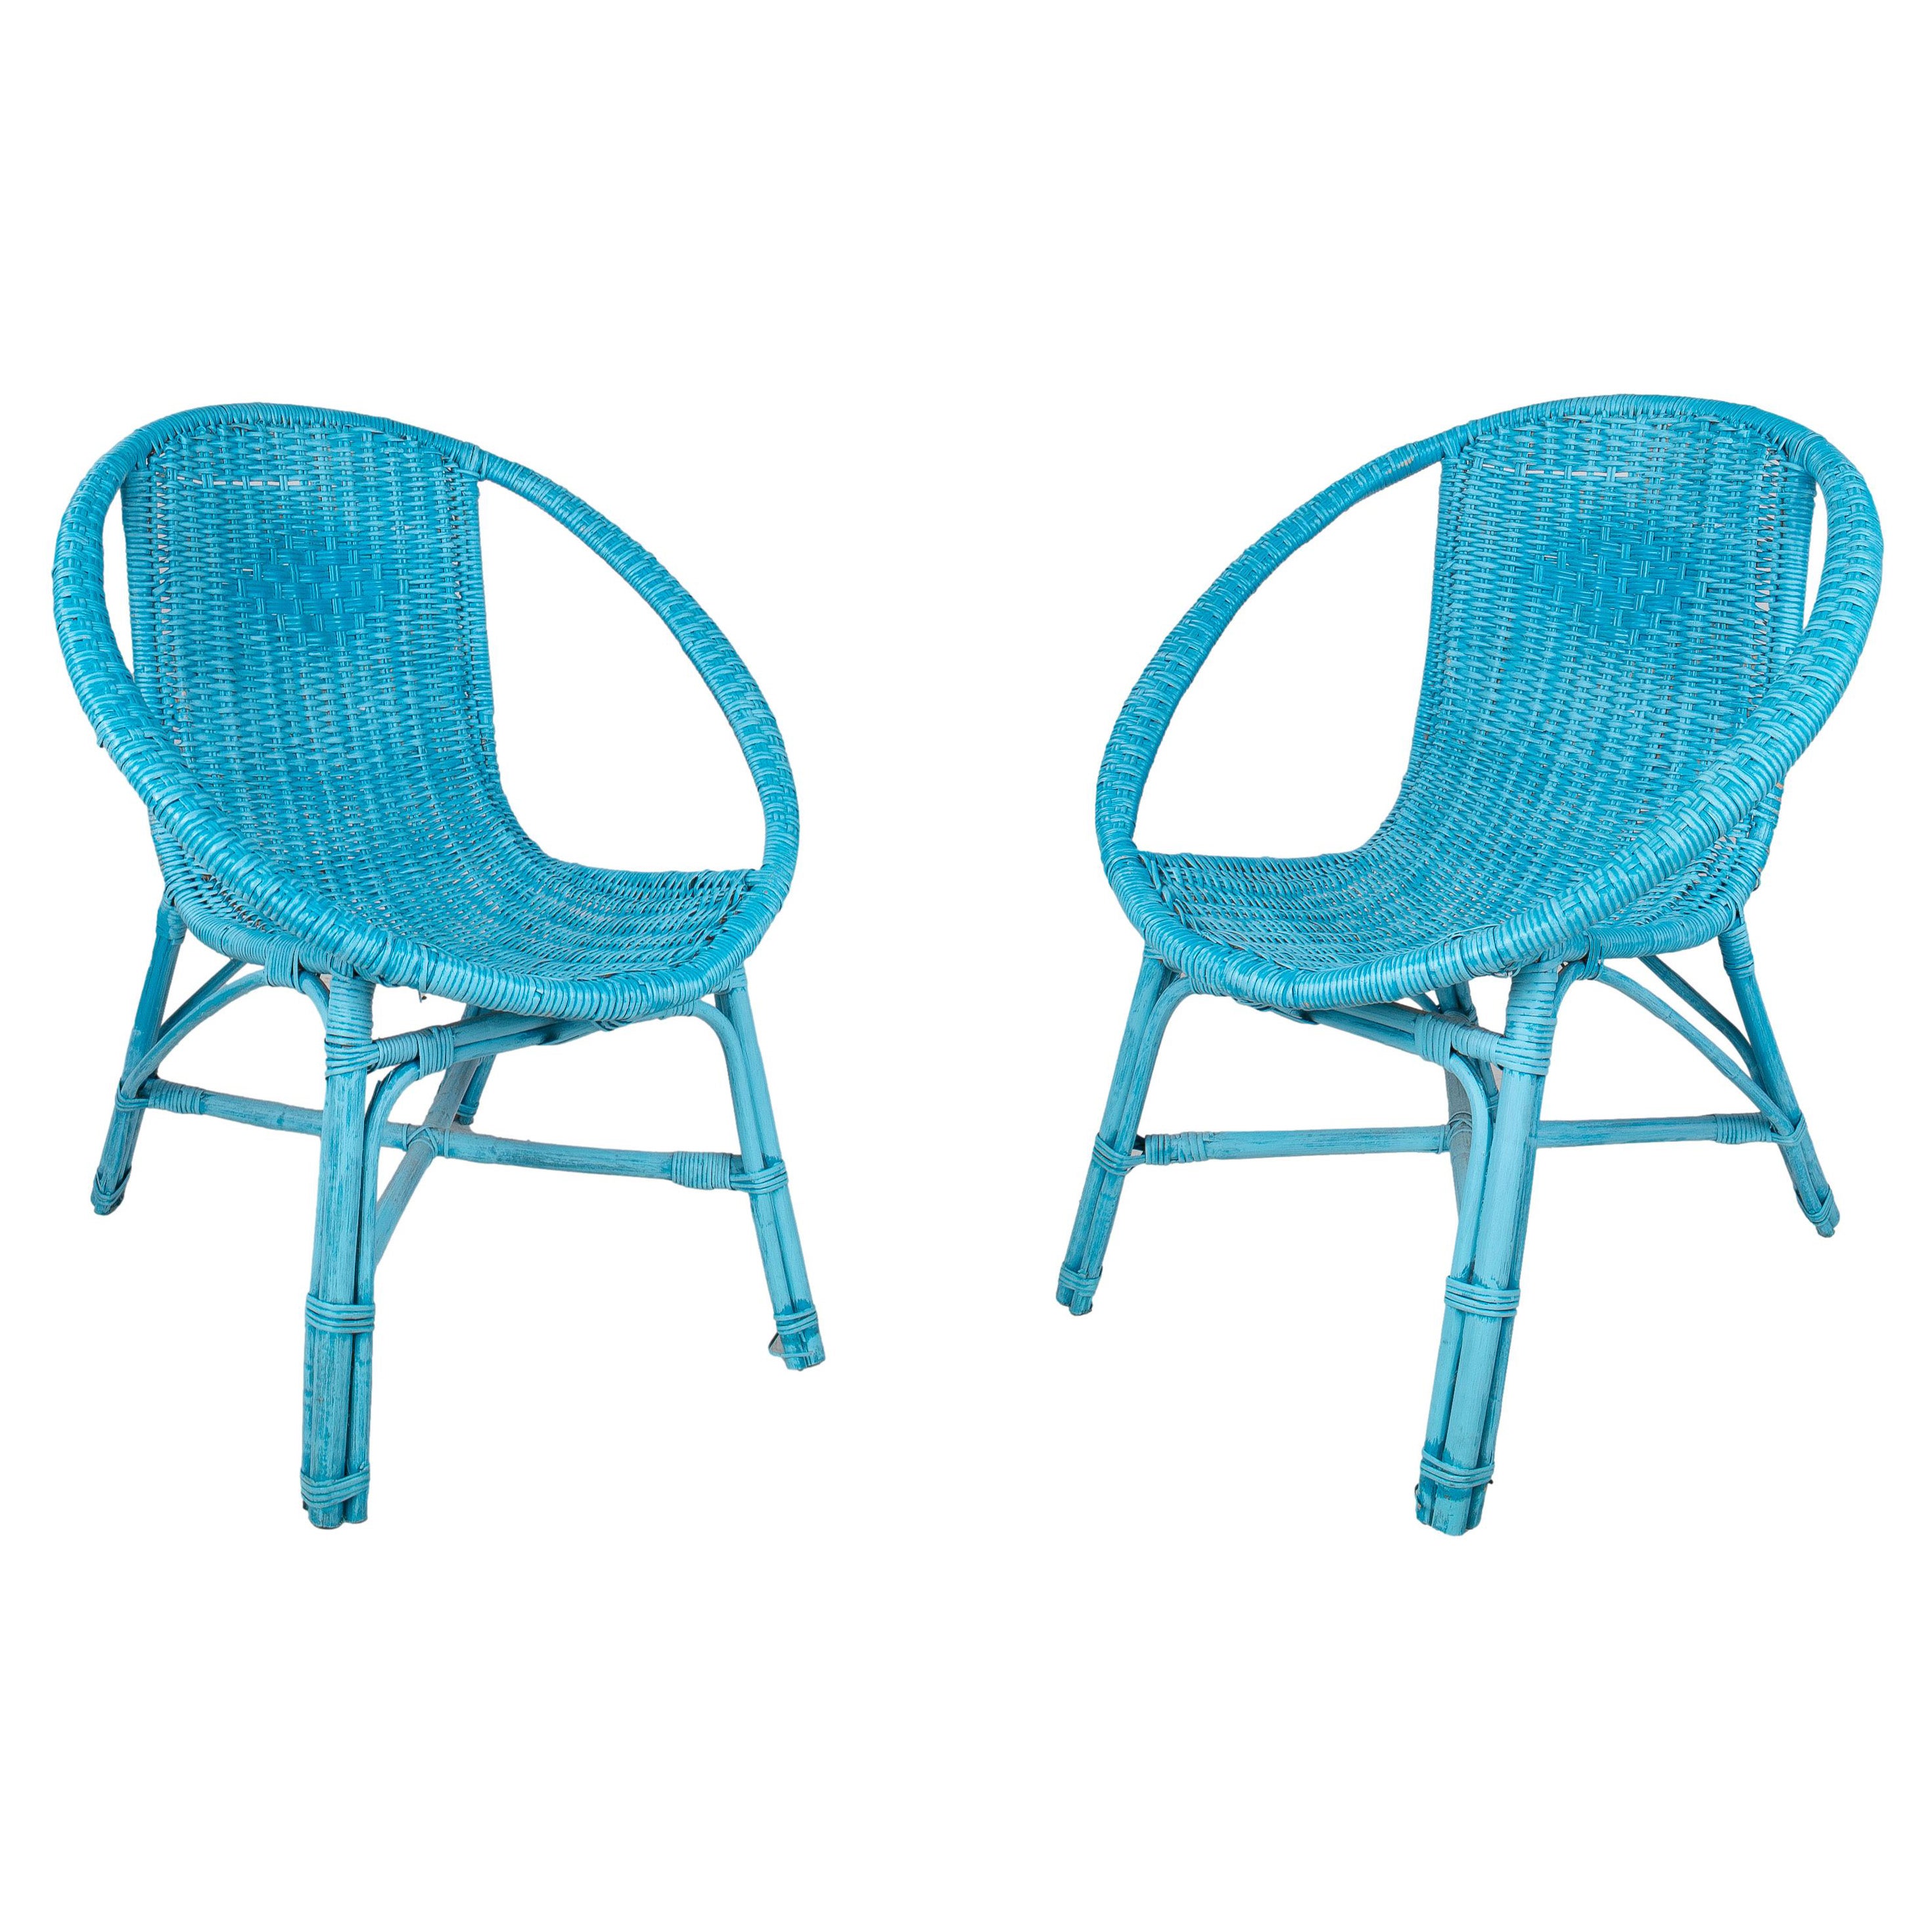 Pair of 1970s Spanish Woven Wicker Blue Chairs